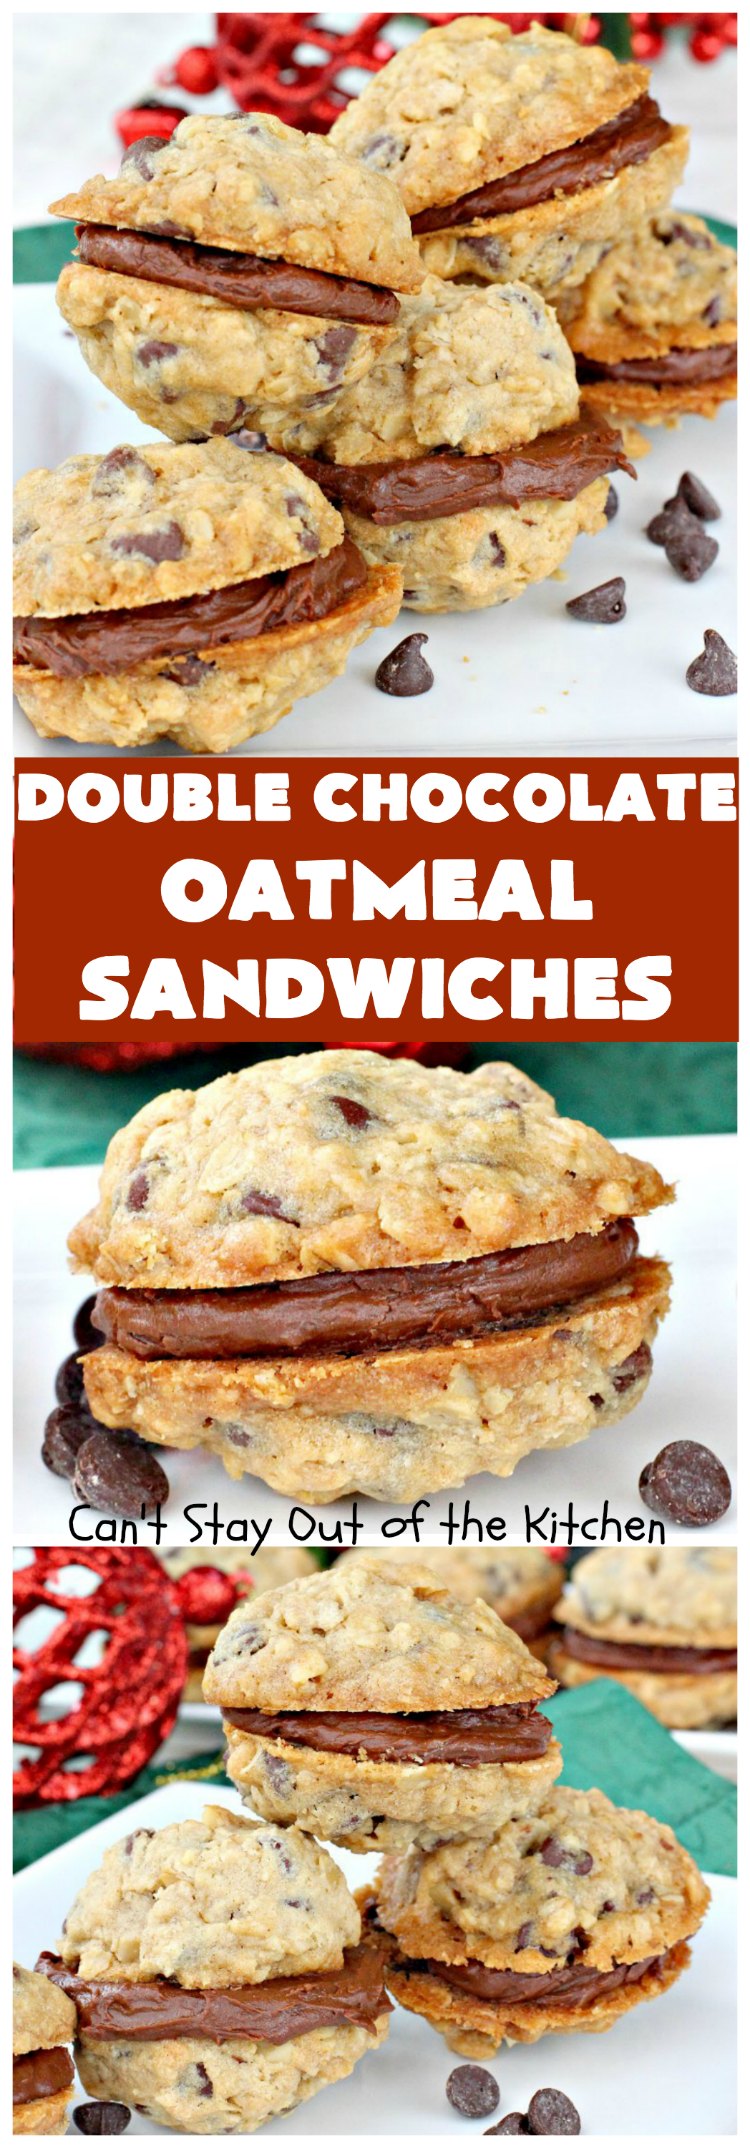 Double Chocolate Oatmeal Sandwiches | Can't Stay Out of the Kitchen